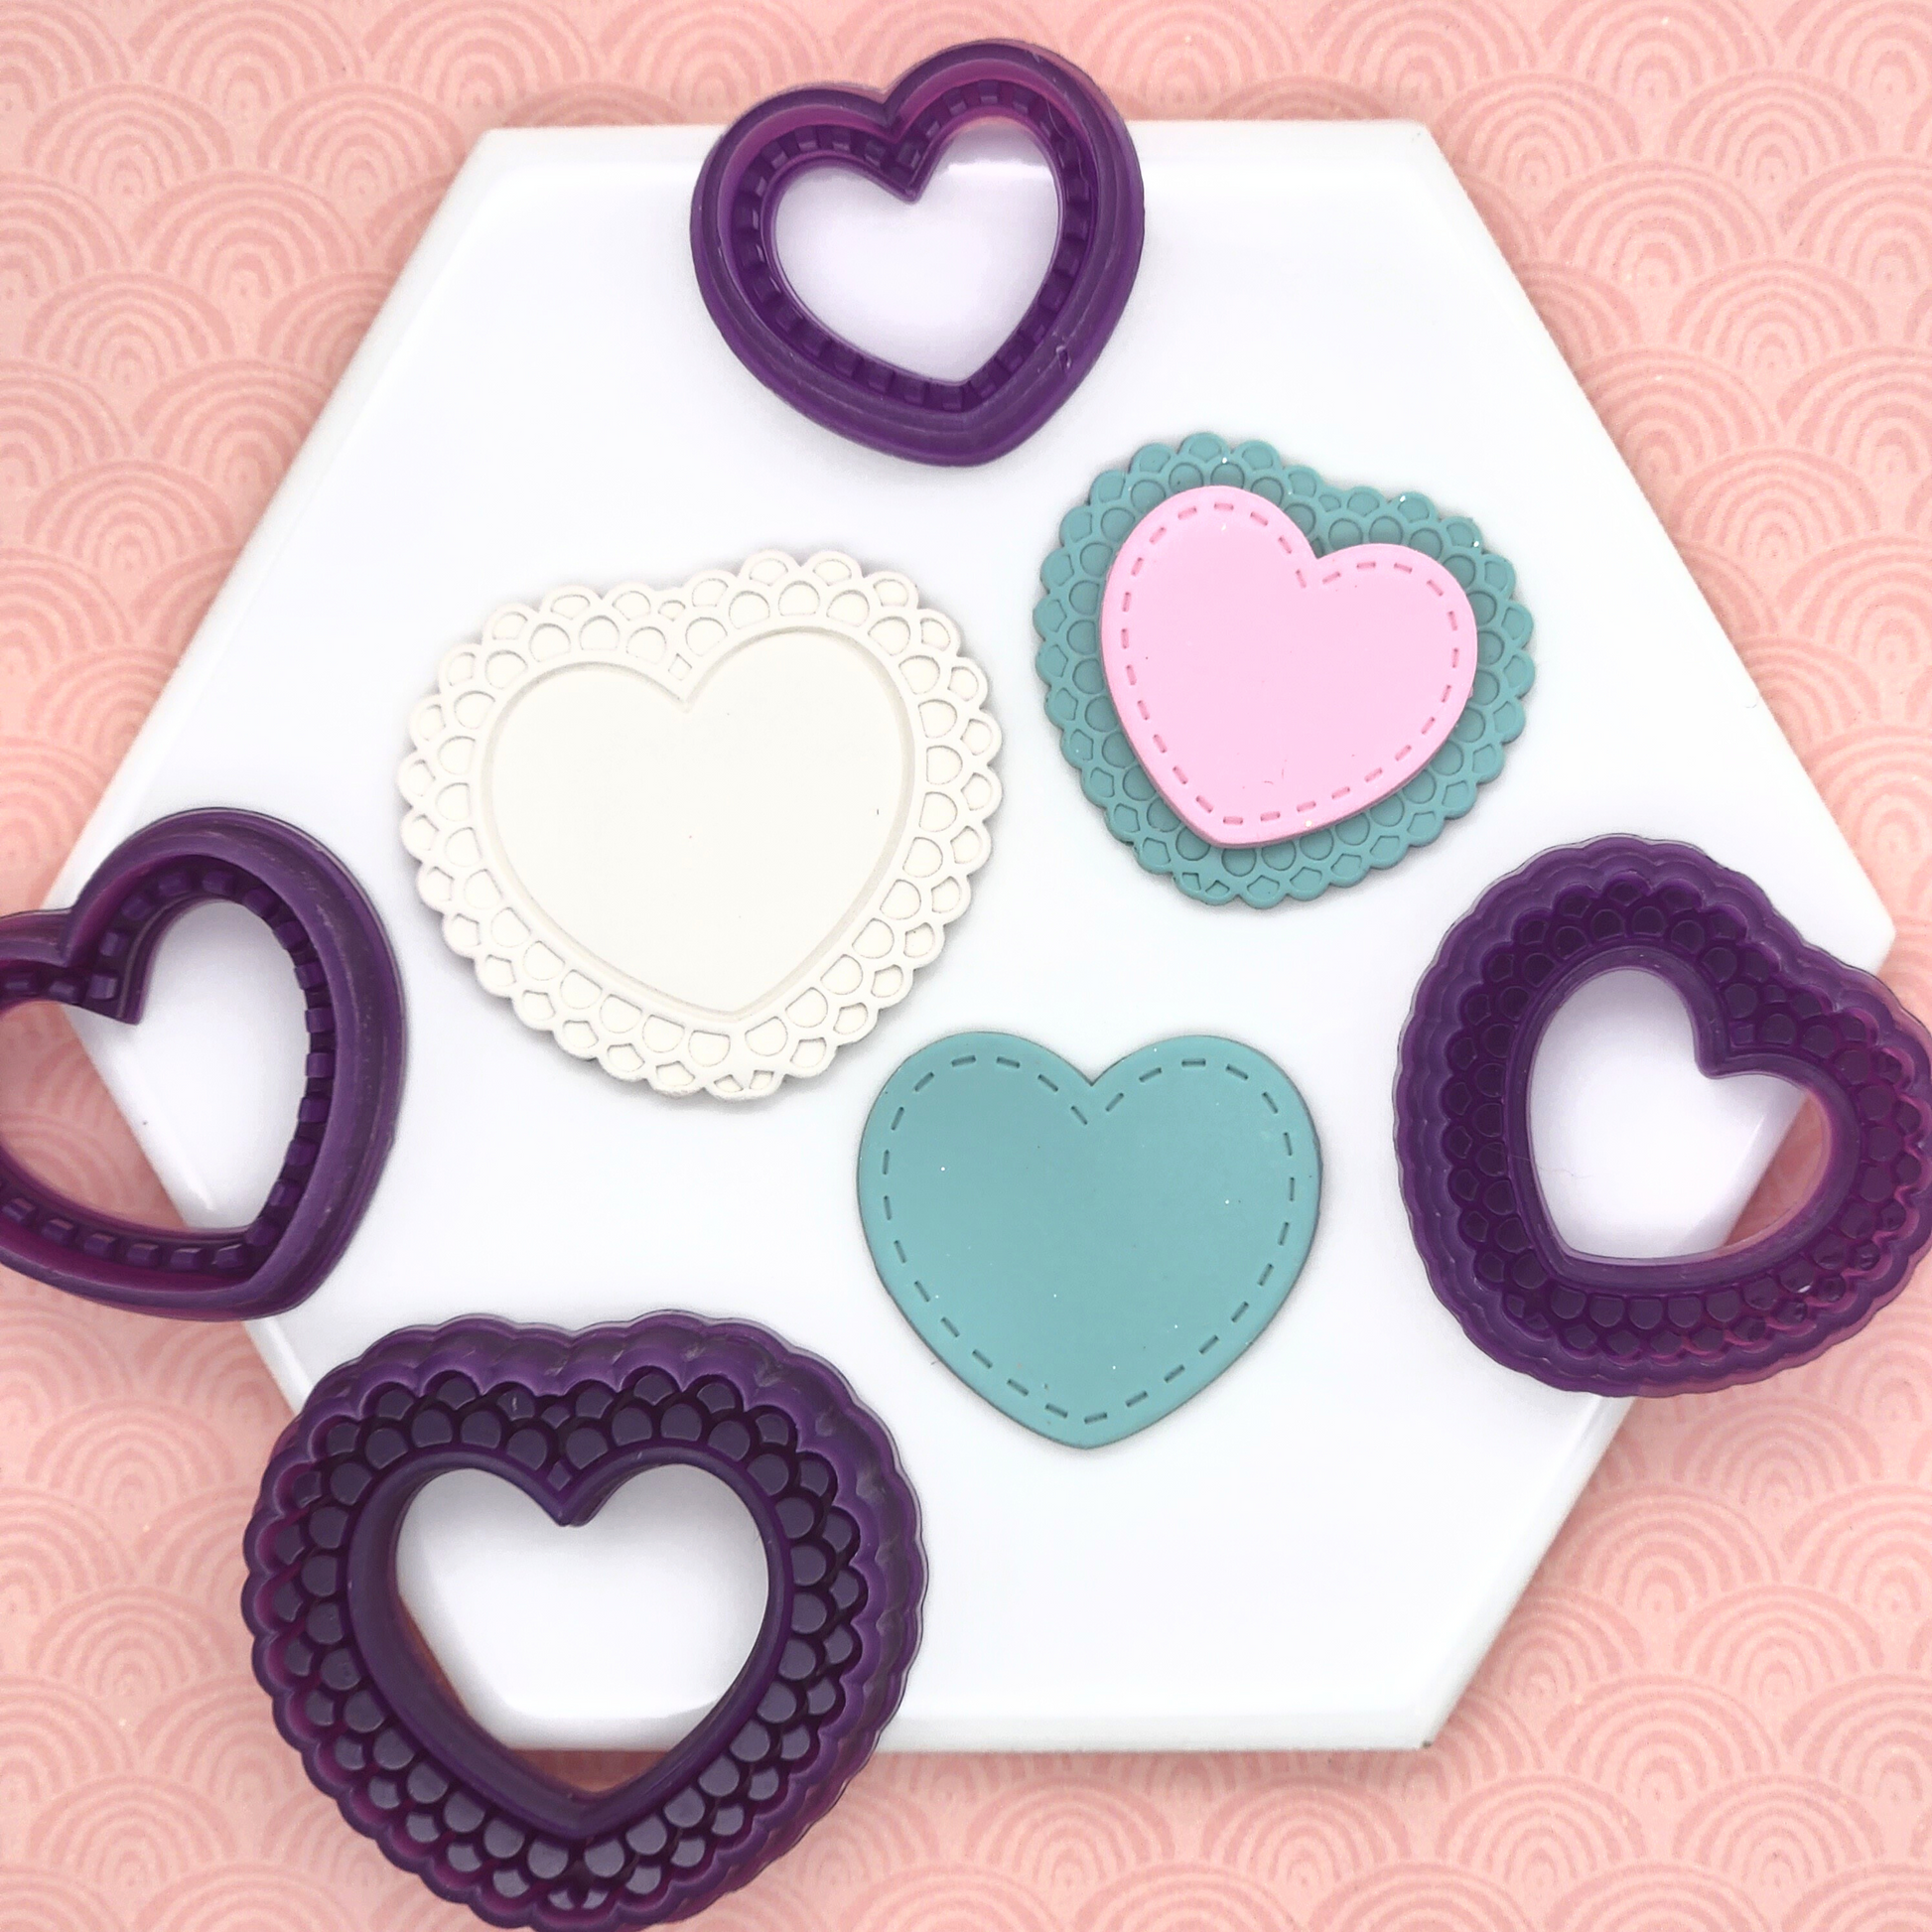 Stitched and Doily Heart Set is composed of a heart shaped doily like outline pattern cutter, and a smaller heart shaped stitch outline pattern cutter. In photo, Stitched and Doily Heart Cutter Set with sample polymer clay finish product